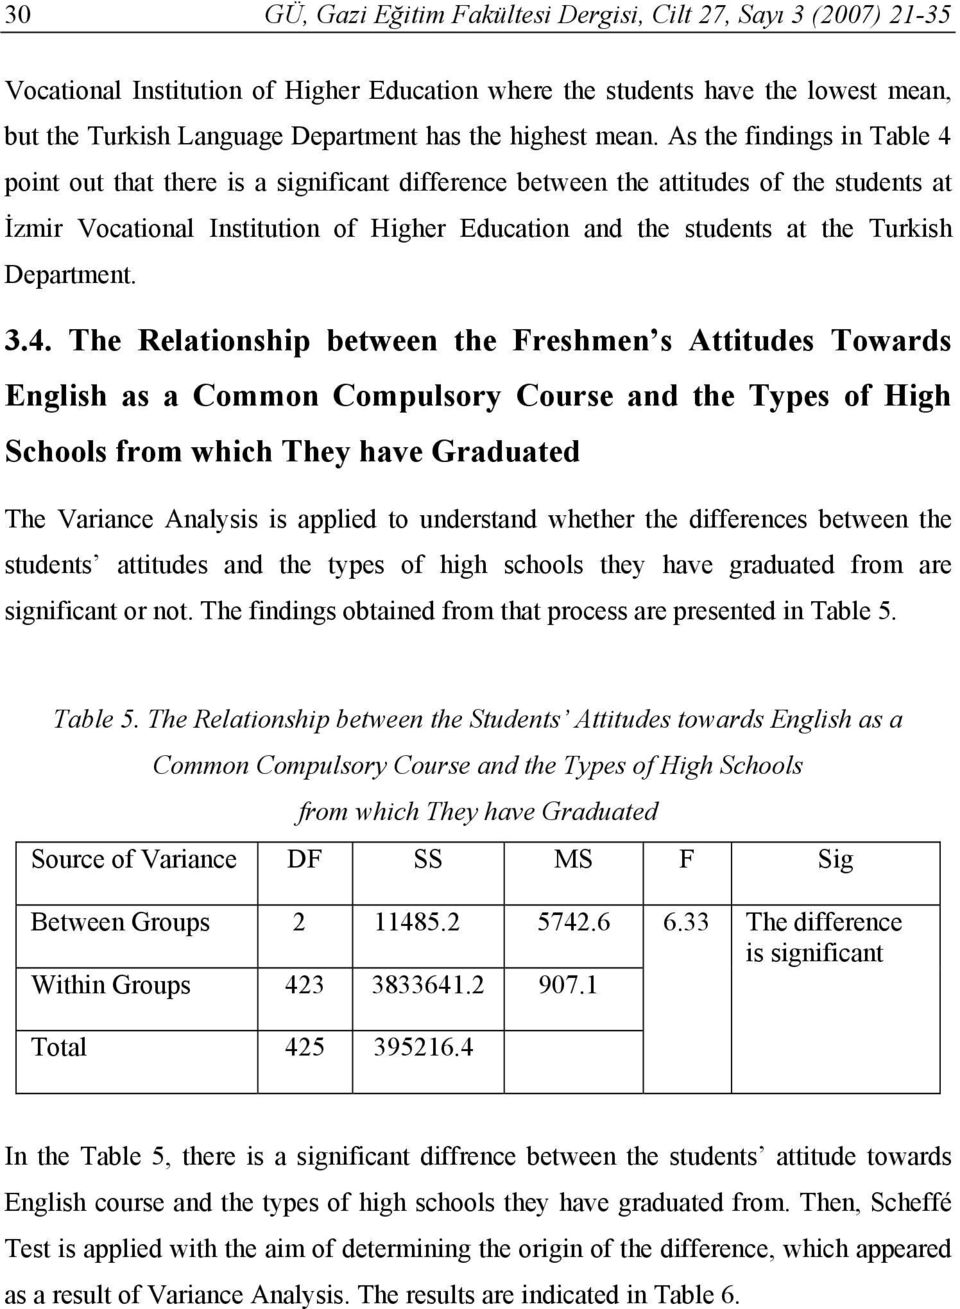 As the findings in Table 4 point out that there is a significant difference between the attitudes of the students at İzmir Vocational Institution of Higher Education and the students at the Turkish